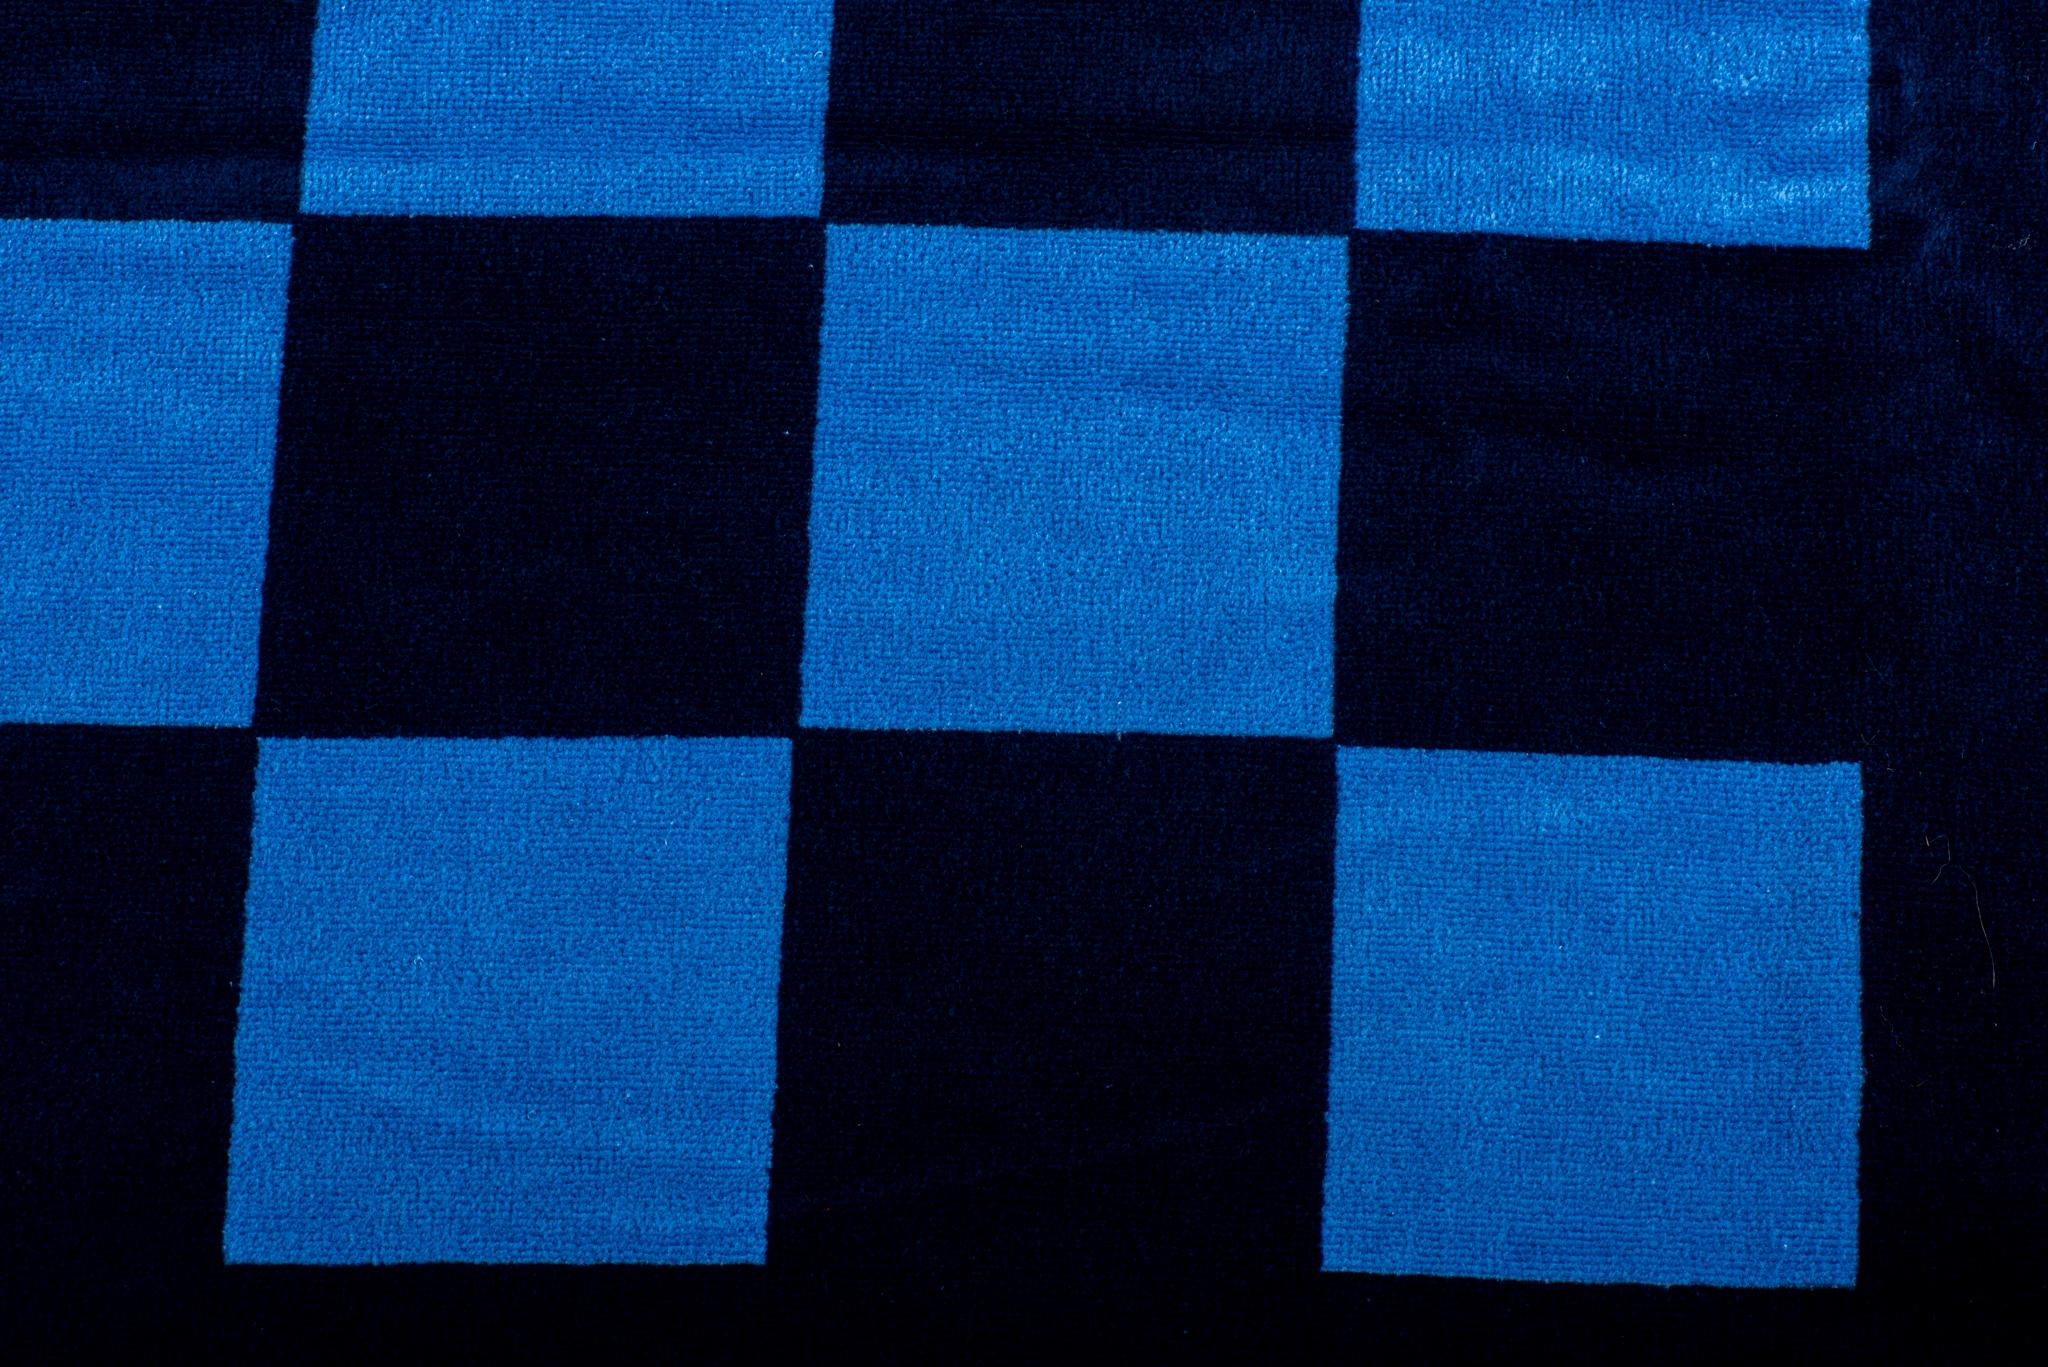 Chanel brand new unisex checkers beach towel, navy and blue combination. Étiquette d'origine jointe.